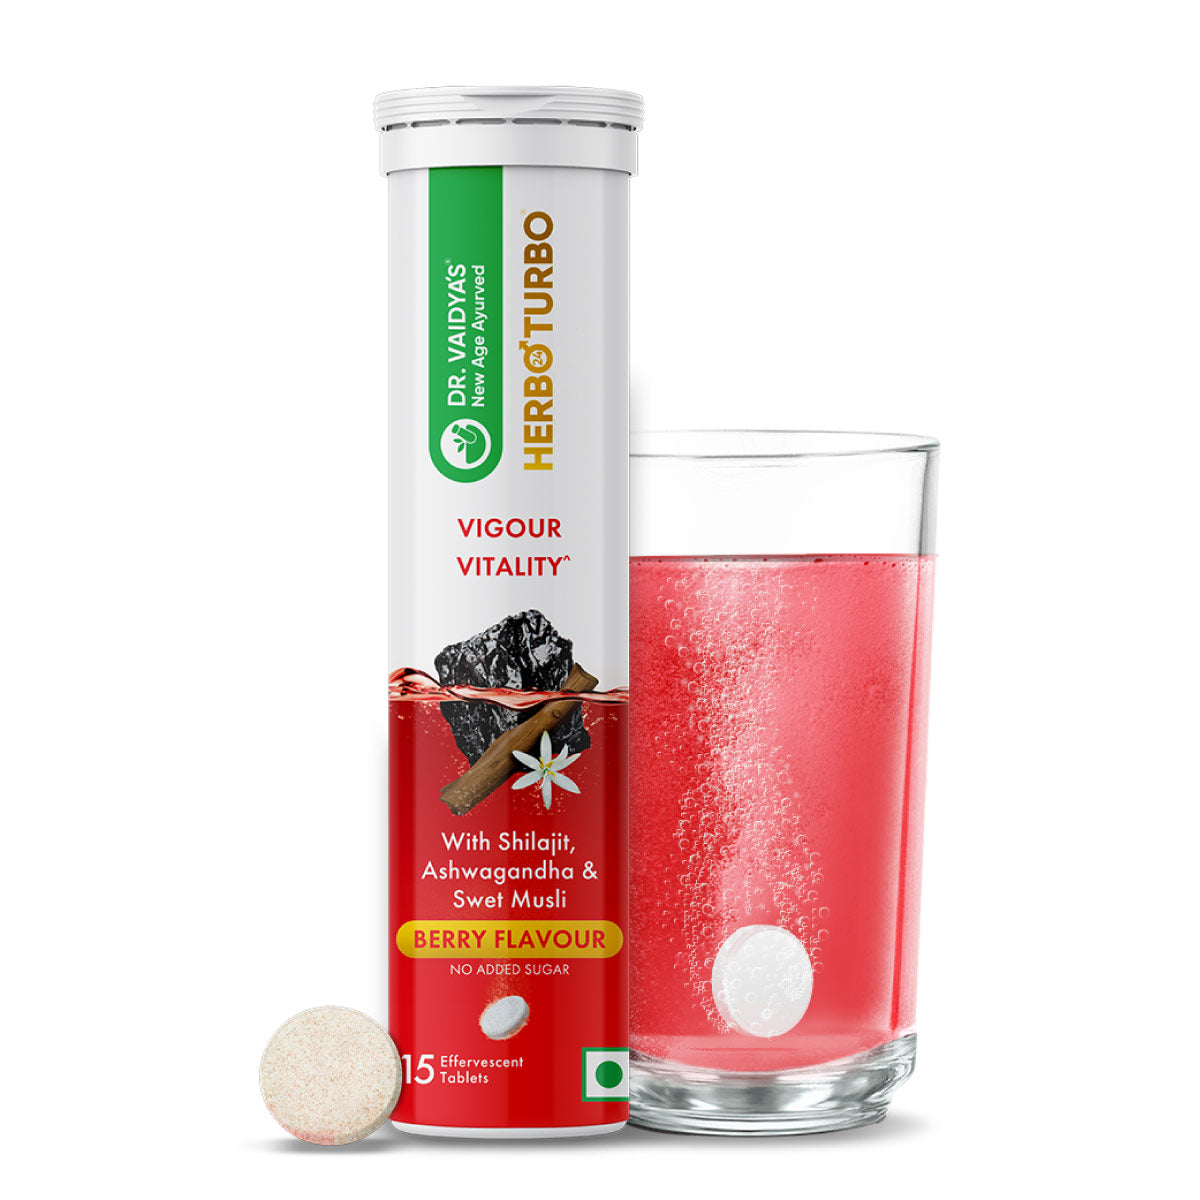 Herbo24Turbo Effervescent: Unlock Super Vigour and Vitality with Shilajit and Ashwagandha